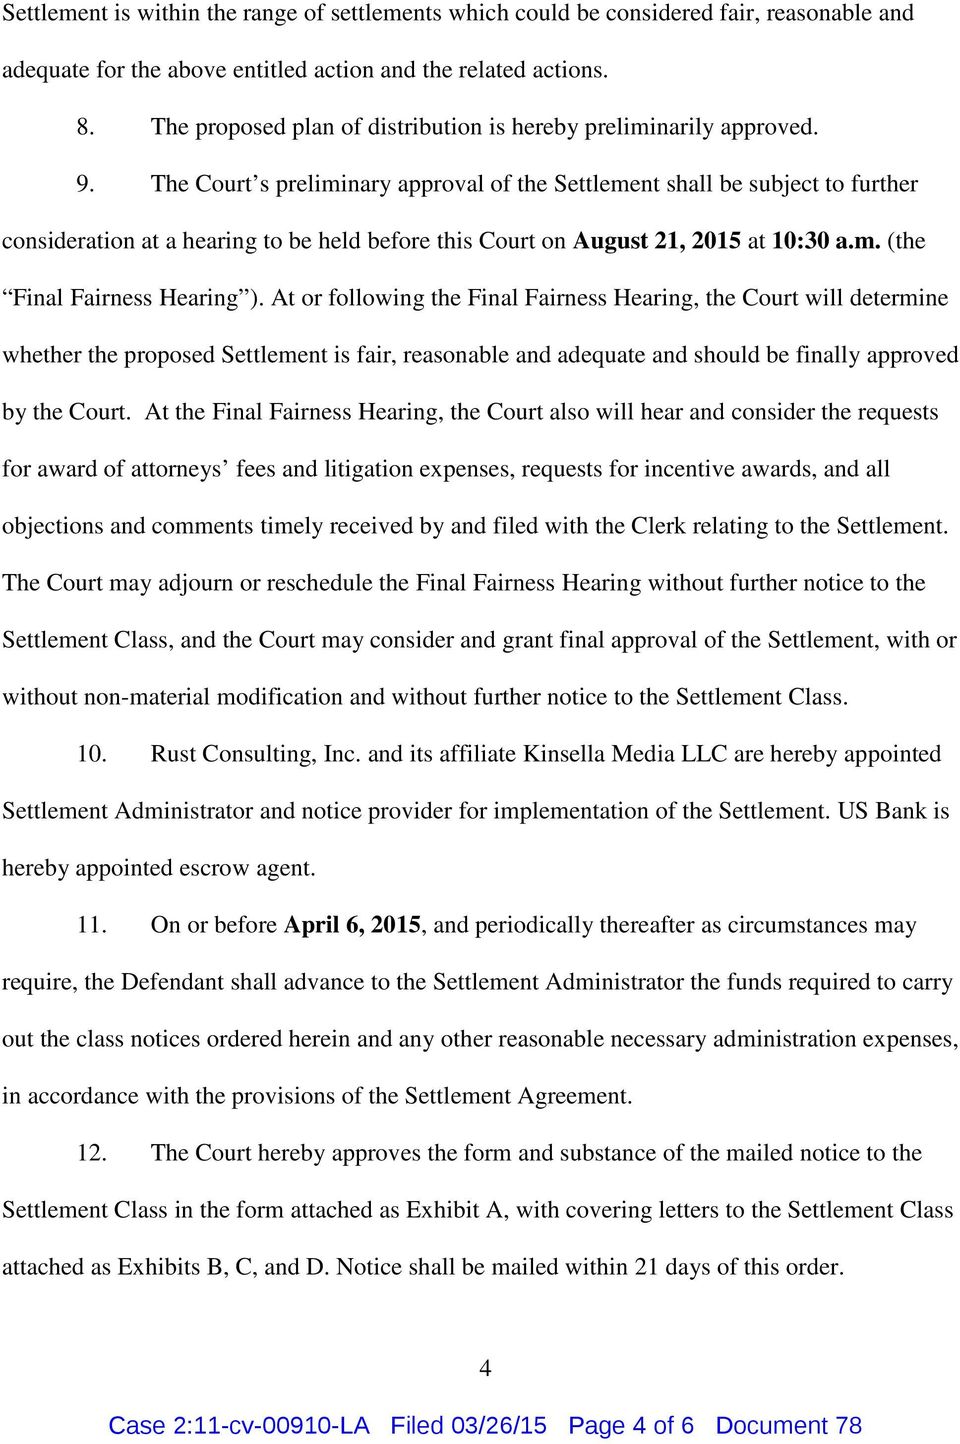 The Court s preliminary approval of the Settlement shall be subject to further consideration at a hearing to be held before this Court on August 21, 2015 at 10:30 a.m. (the Final Fairness Hearing ).